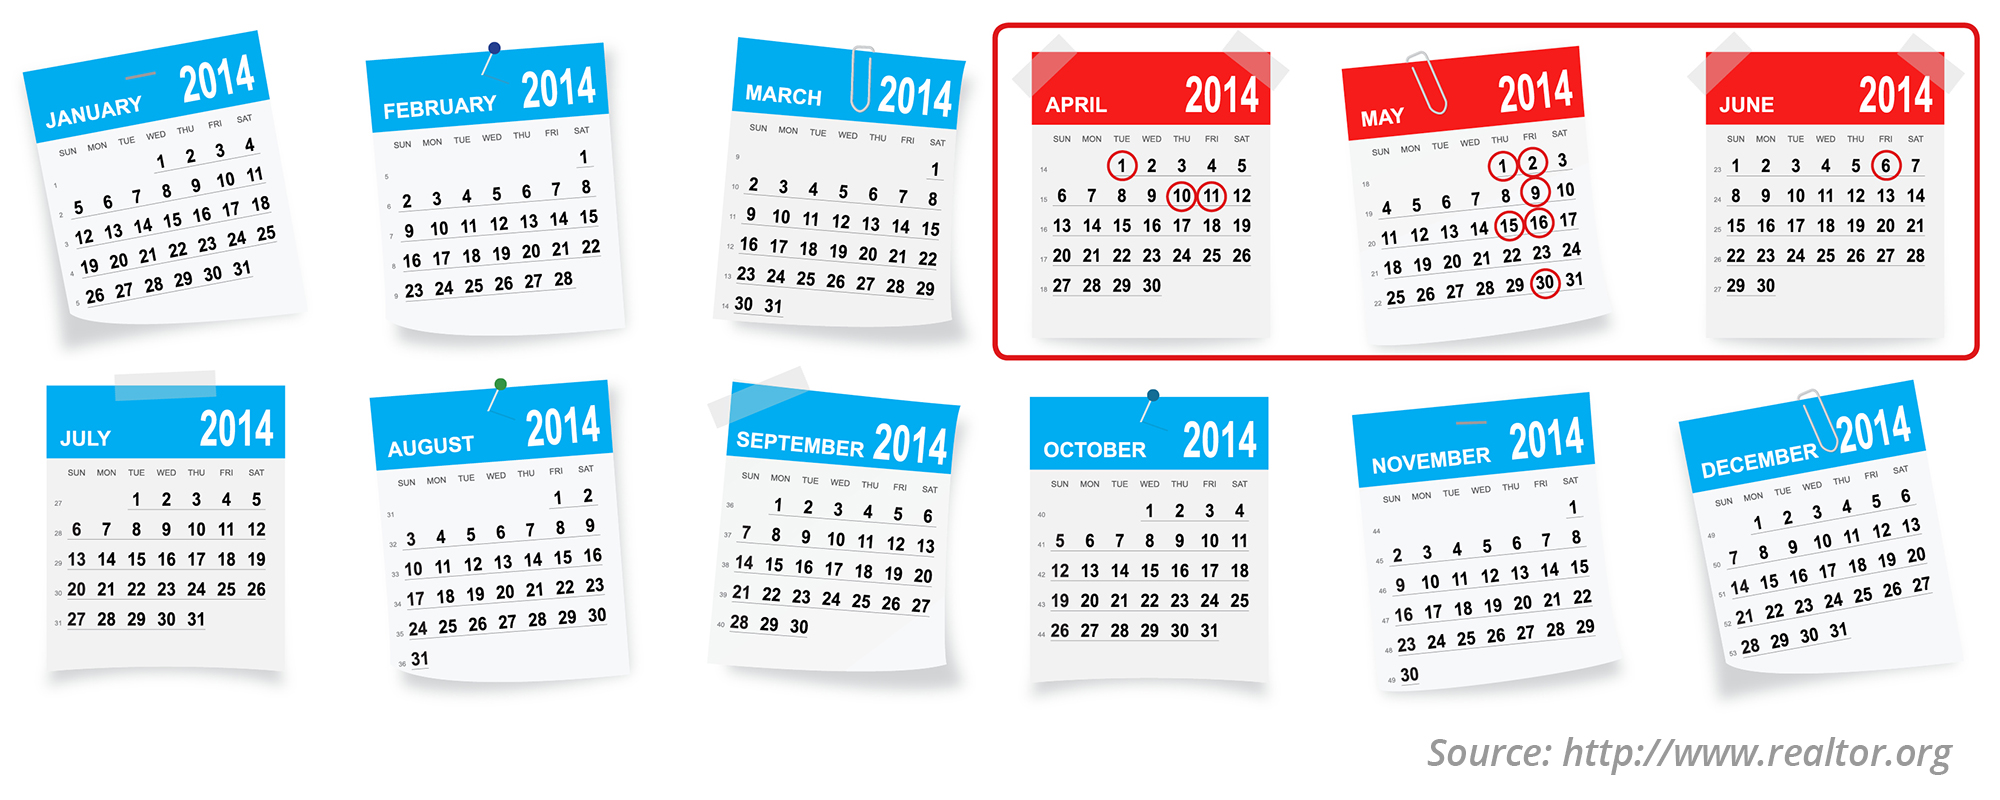 Top 10 Listing Dates of 2014 | Simplifying The Market